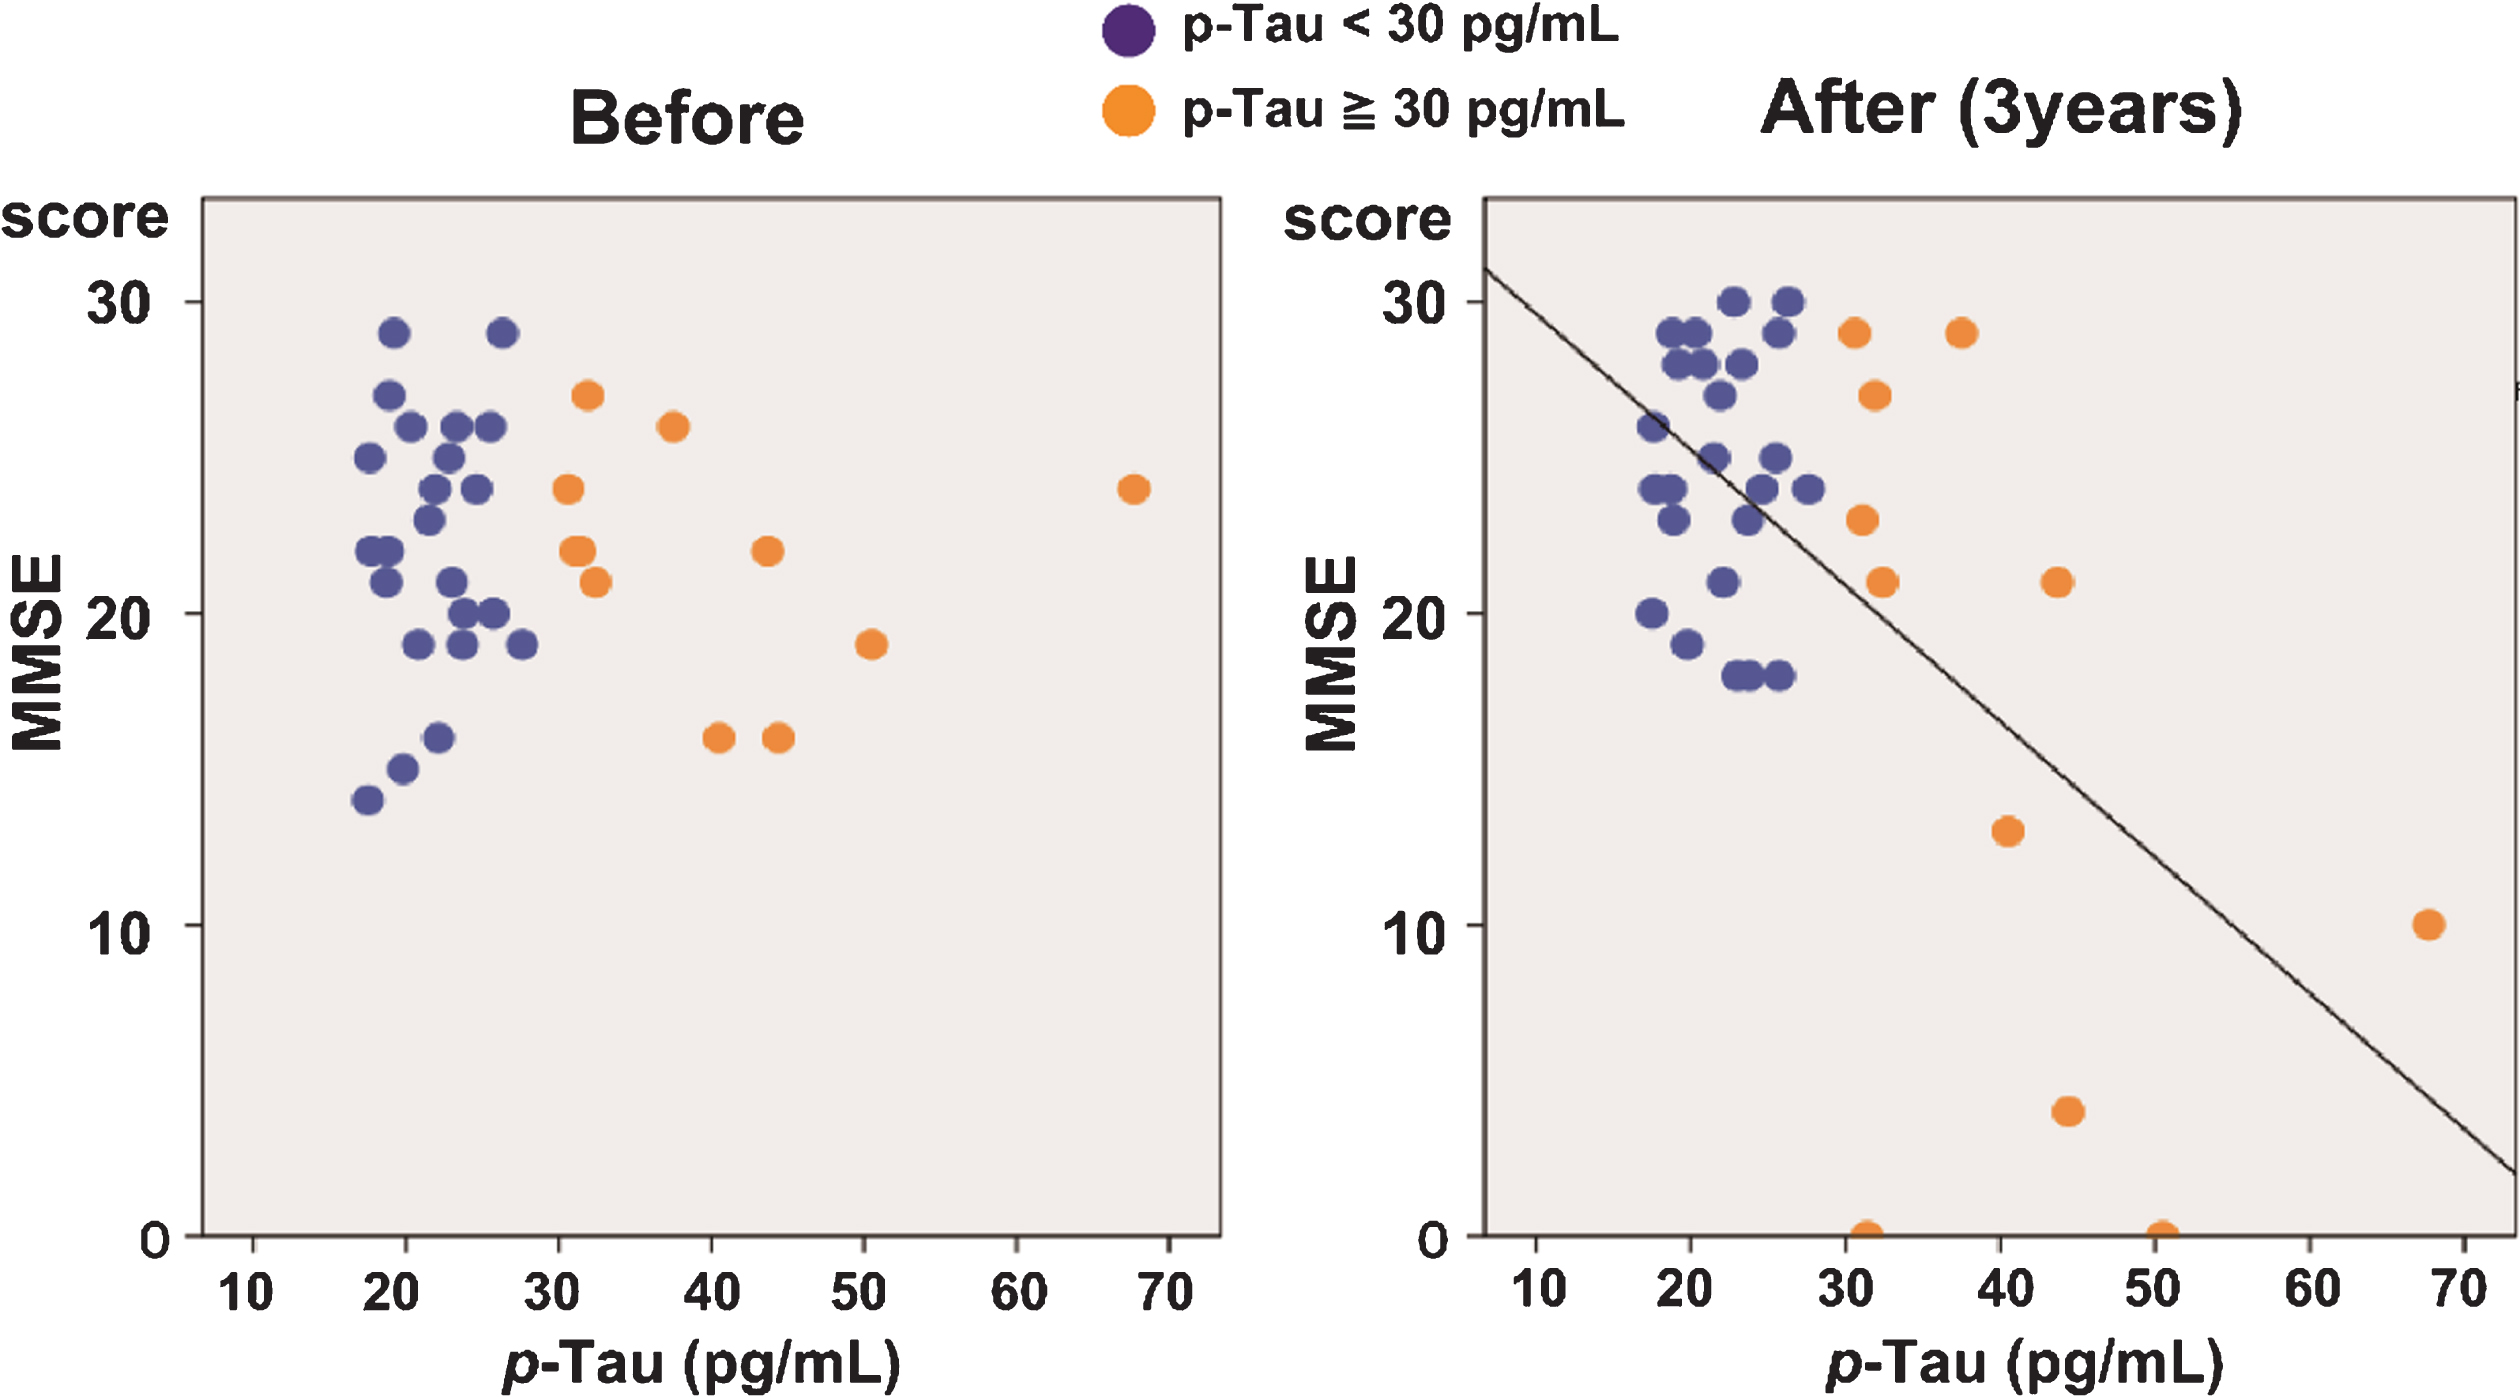 Correlation between p-Tau levels and MMSE scores in iNPH patients. Correlation between the MMSE scores and p-Tau levels before (left) and three years after (right) shunt surgery. While no significant correlation was observed before the treatment, a significant negative correlation was observed three years after surgery (R2 = 0.352, p < 0.001).